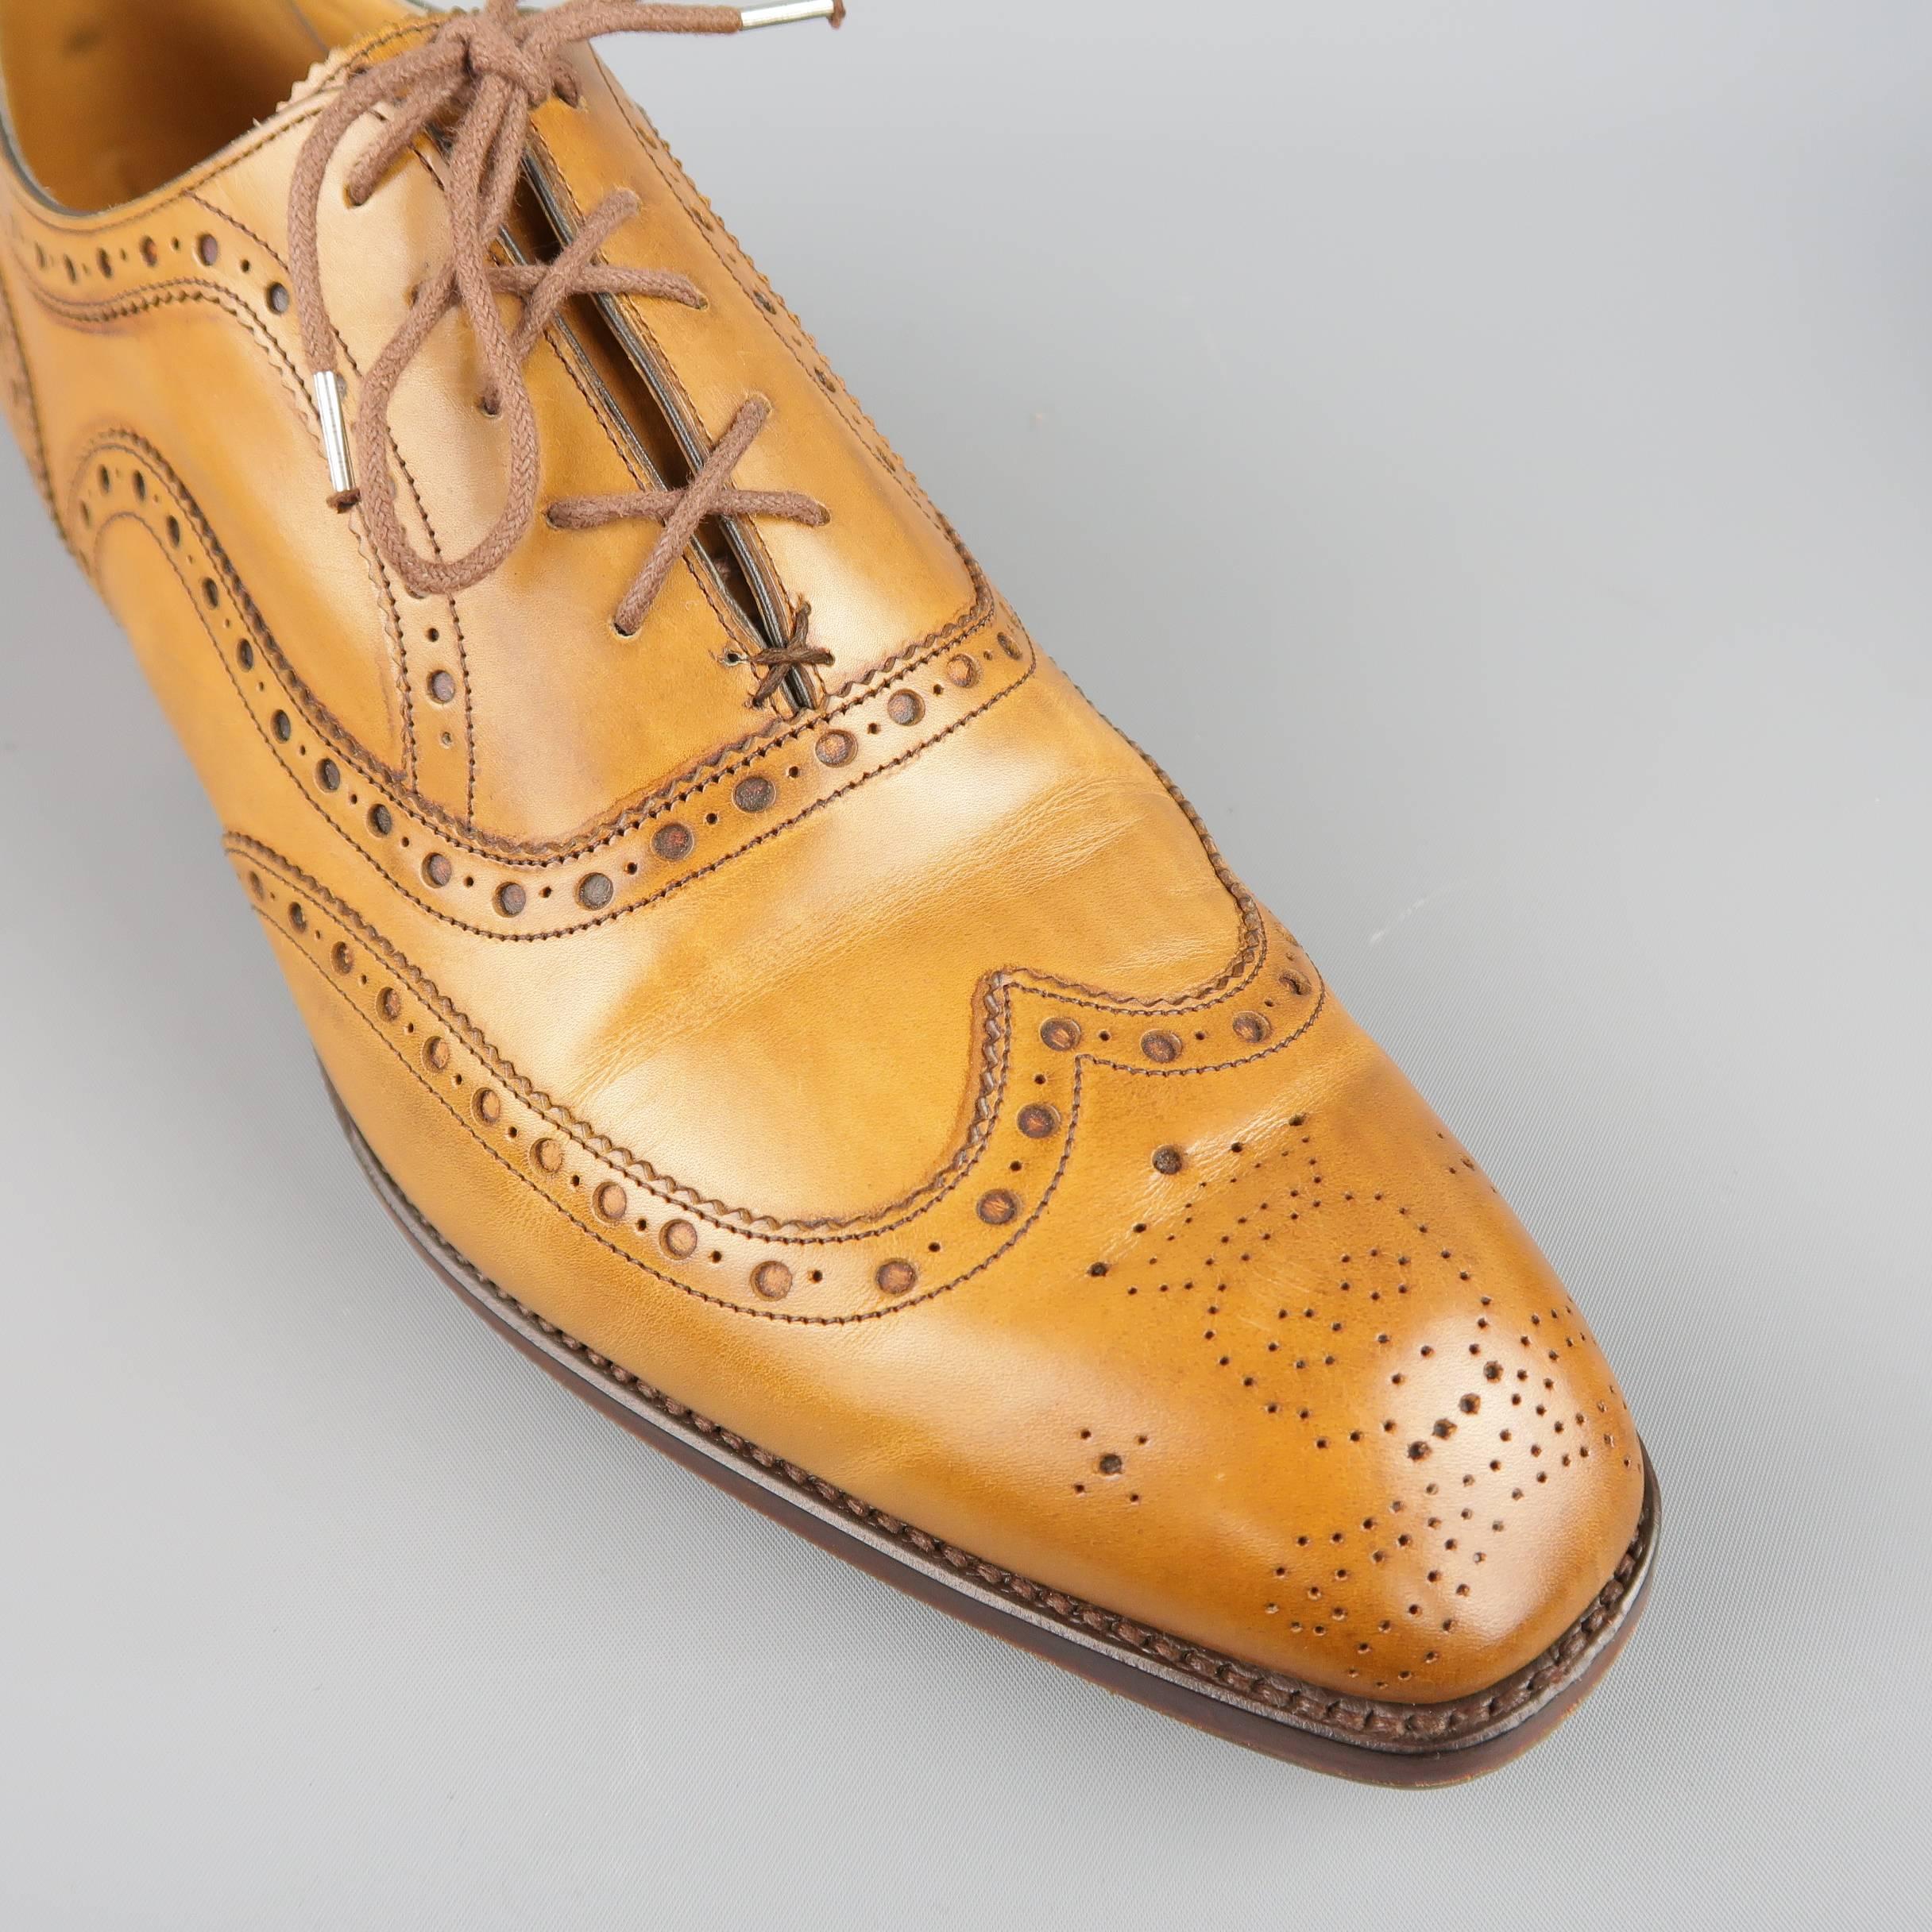 BARKER BLACK "ARCHDALE" dress shoes come in a tan smooth leather an dfeature a squared off point wingtip with signature perforated skull crossbones and perforated brogue details throughout. With box. Made in England.
 
Good Pre-Owned